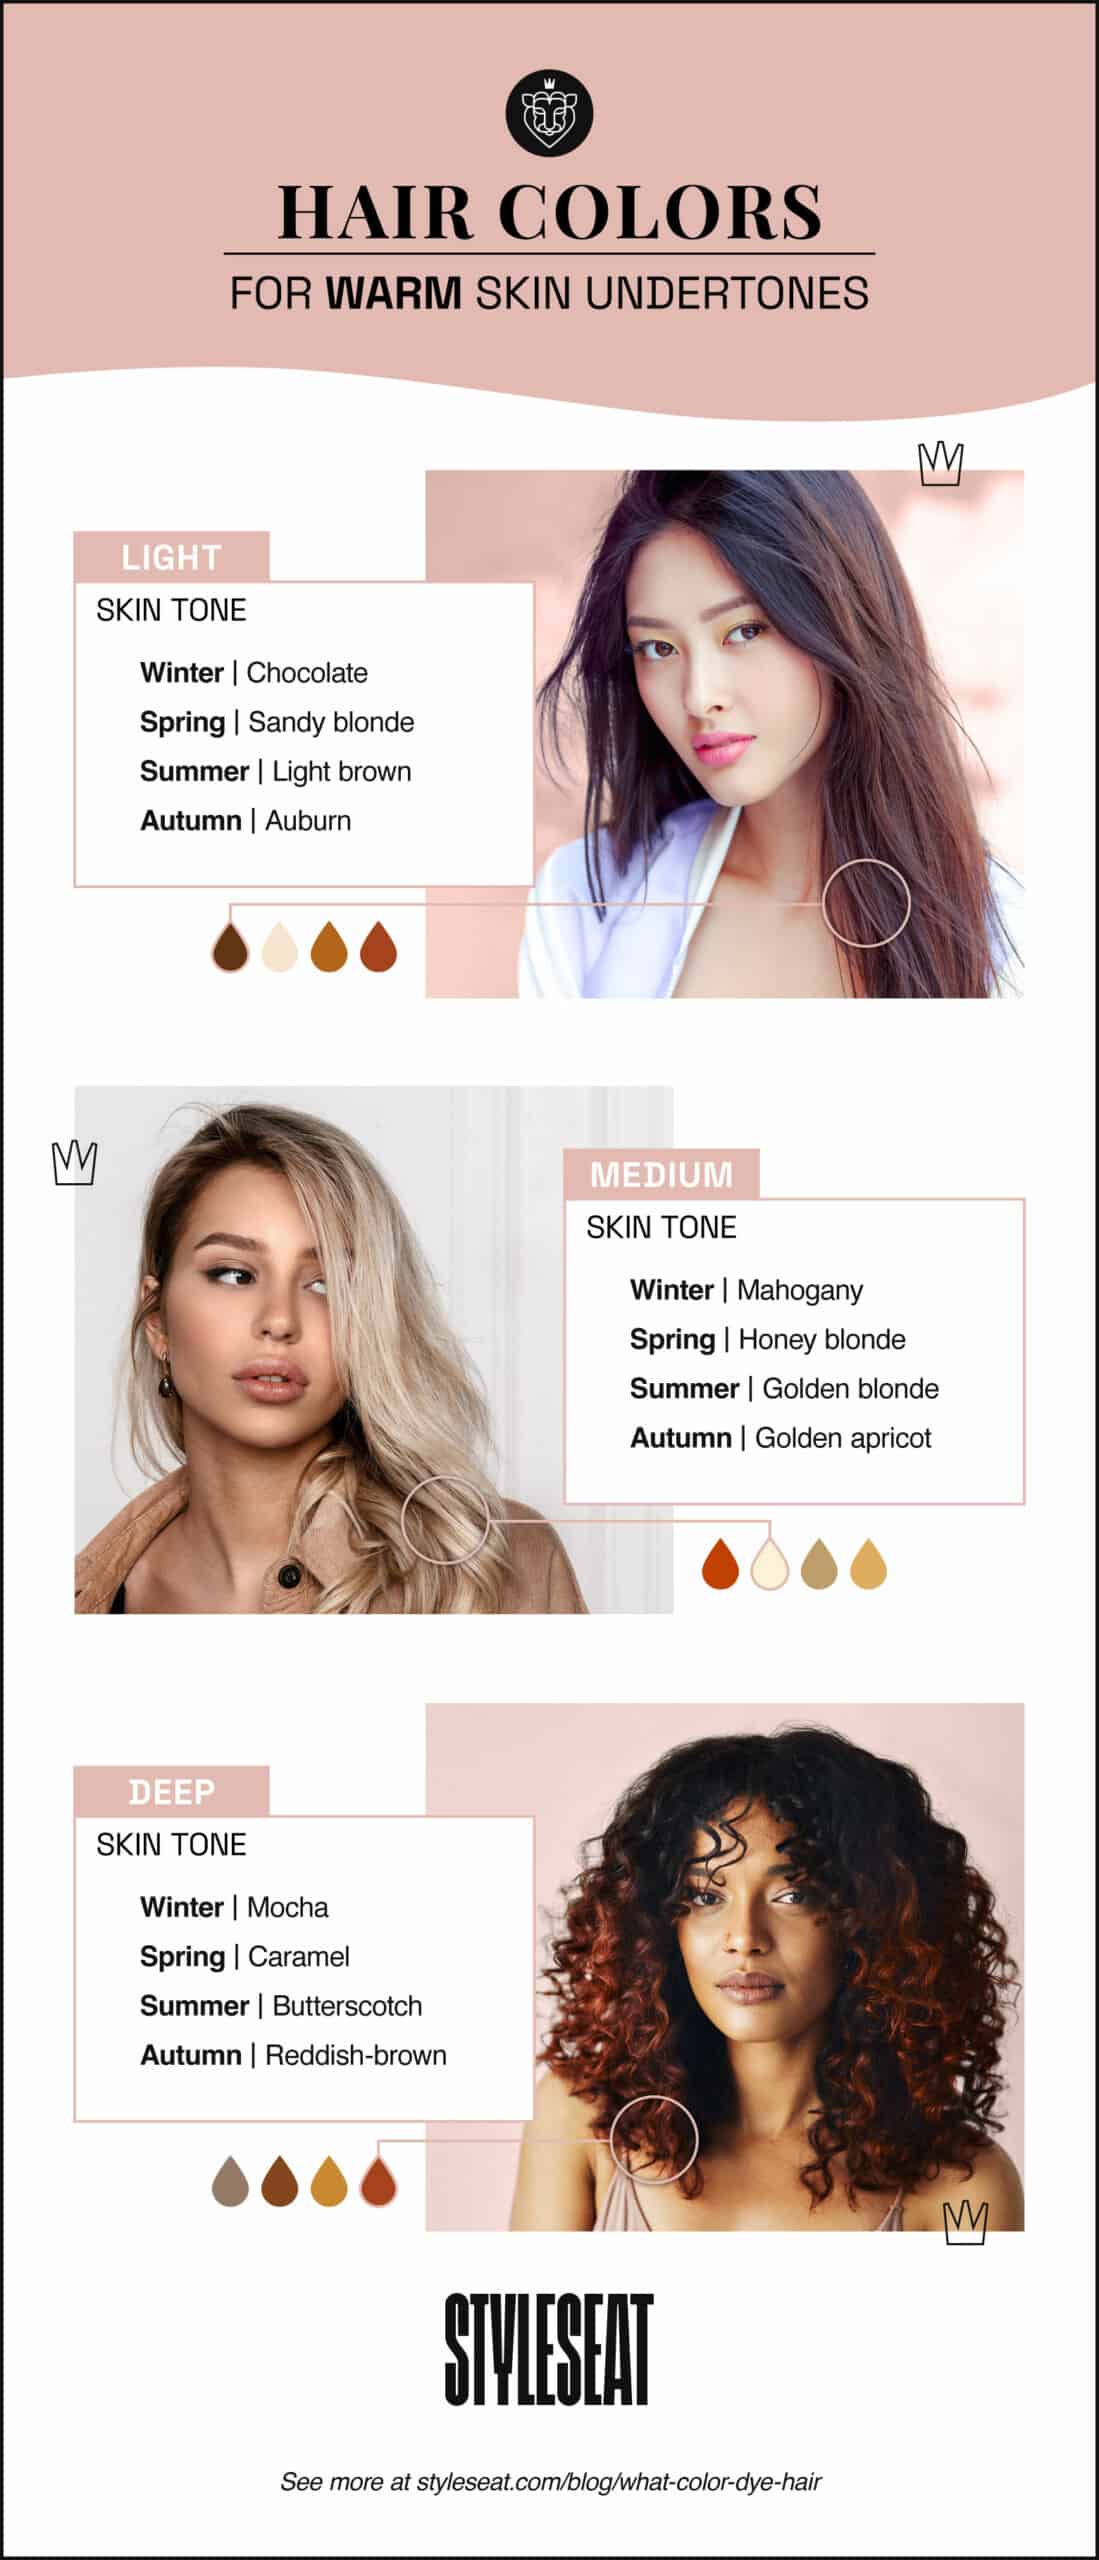 What Color Should I Dye My Hair? Take Our Quiz - StyleSeat